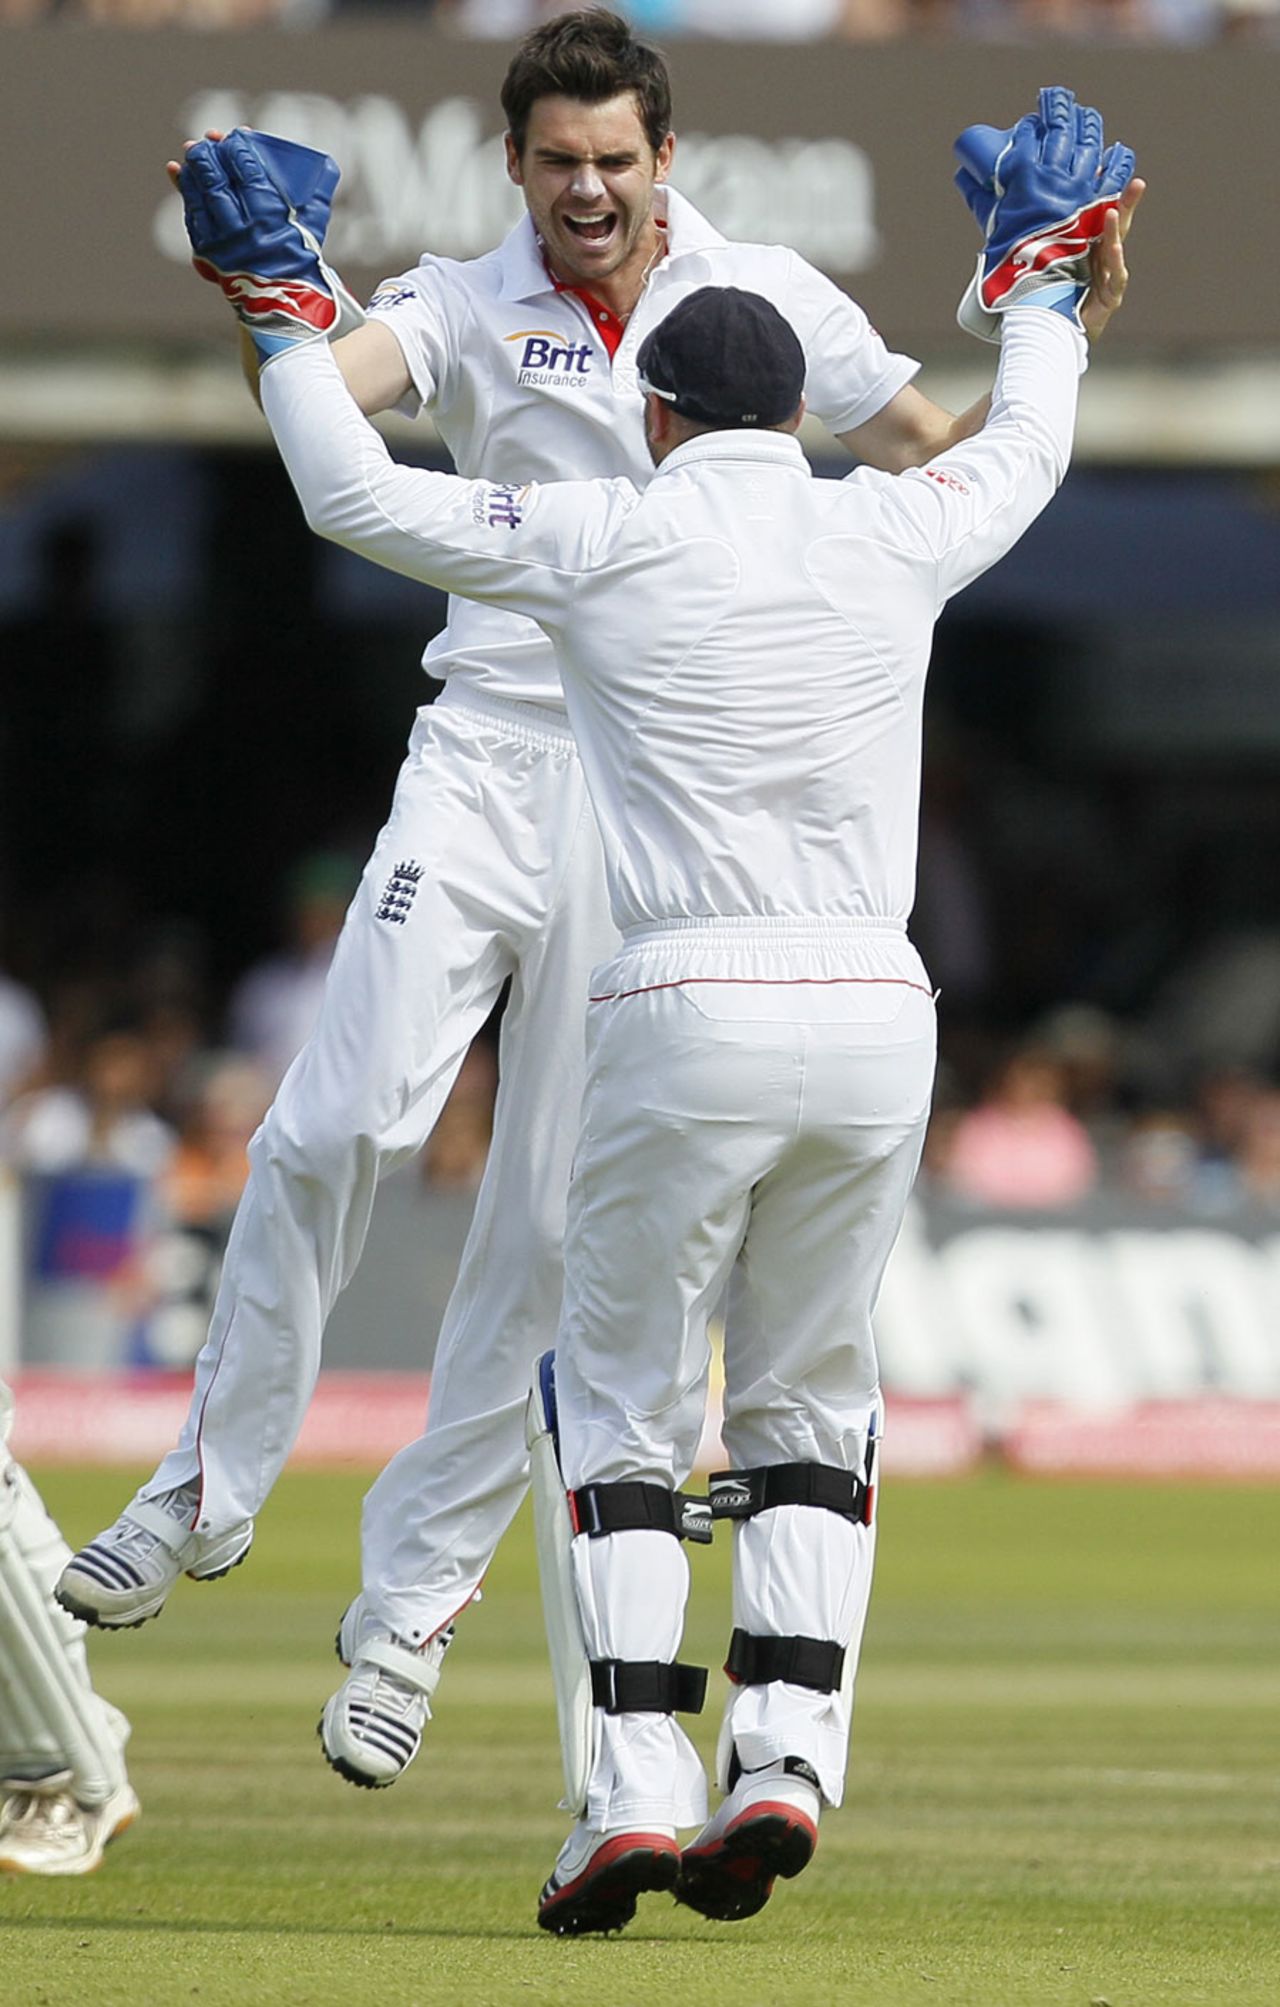 James Anderson celebrates dimissing Rahul Dravid early on day five, England v India, 1st Test, Lord's, 5th day, July 25, 2011